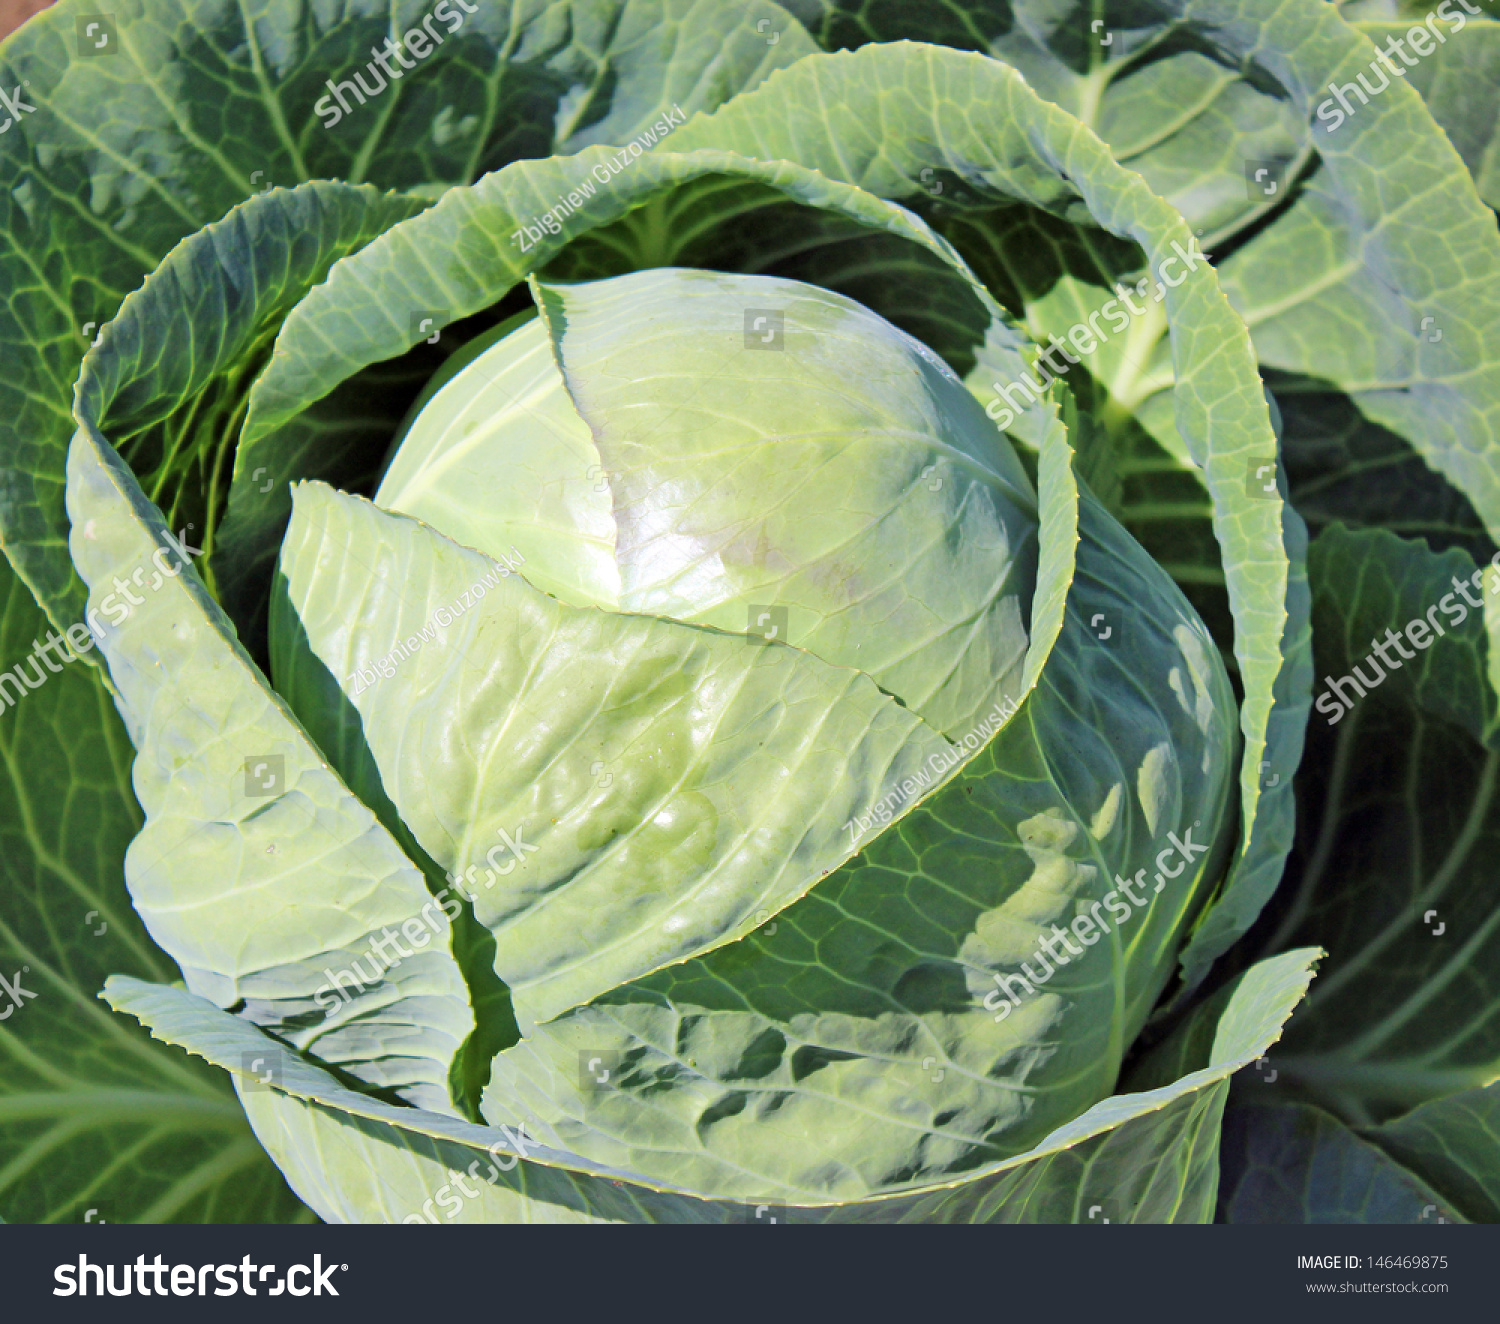 Plantation of the cabbage #146469875